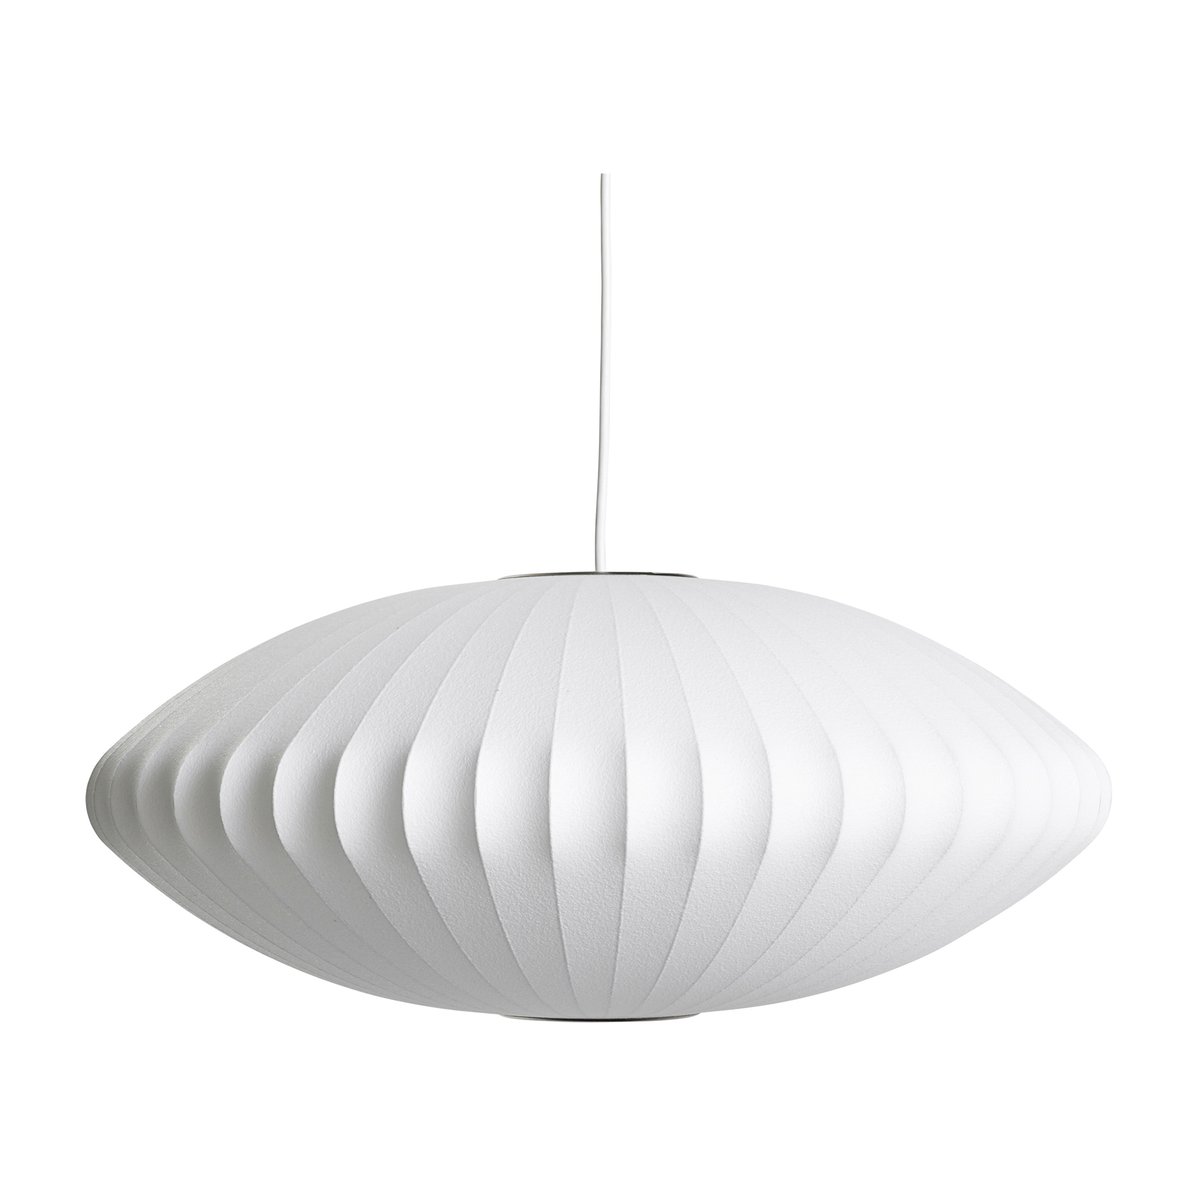 HAY Nelson Bubble Saucer hanglamp M Off white